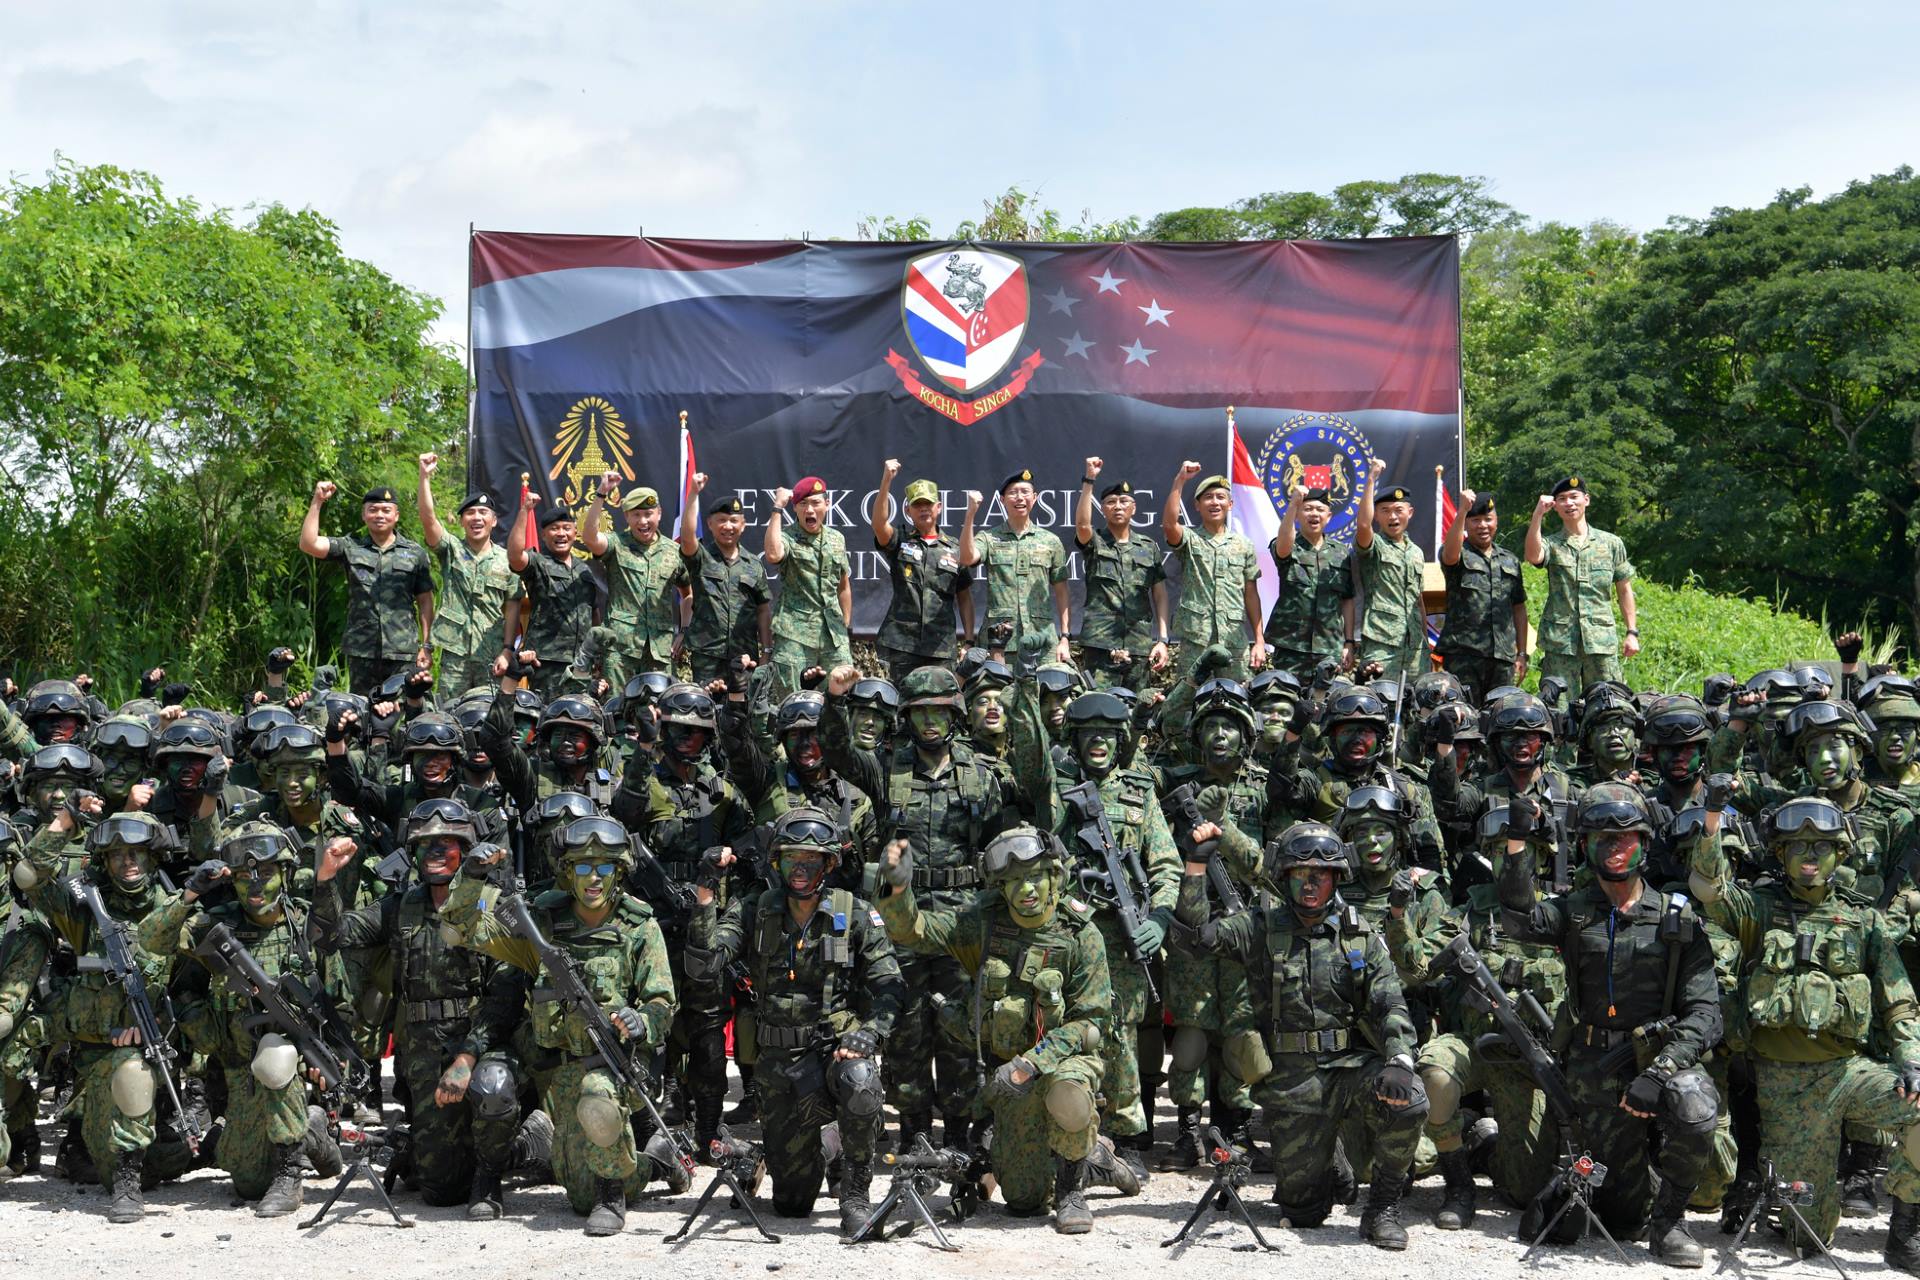 Chief of Army Major-General (MG) Goh Si Hou and Commander-in-Chief of the Royal Thai Army (RTA) General (GEN) Apirat Kongsompong with soldiers from the Singapore Army and the RTA.